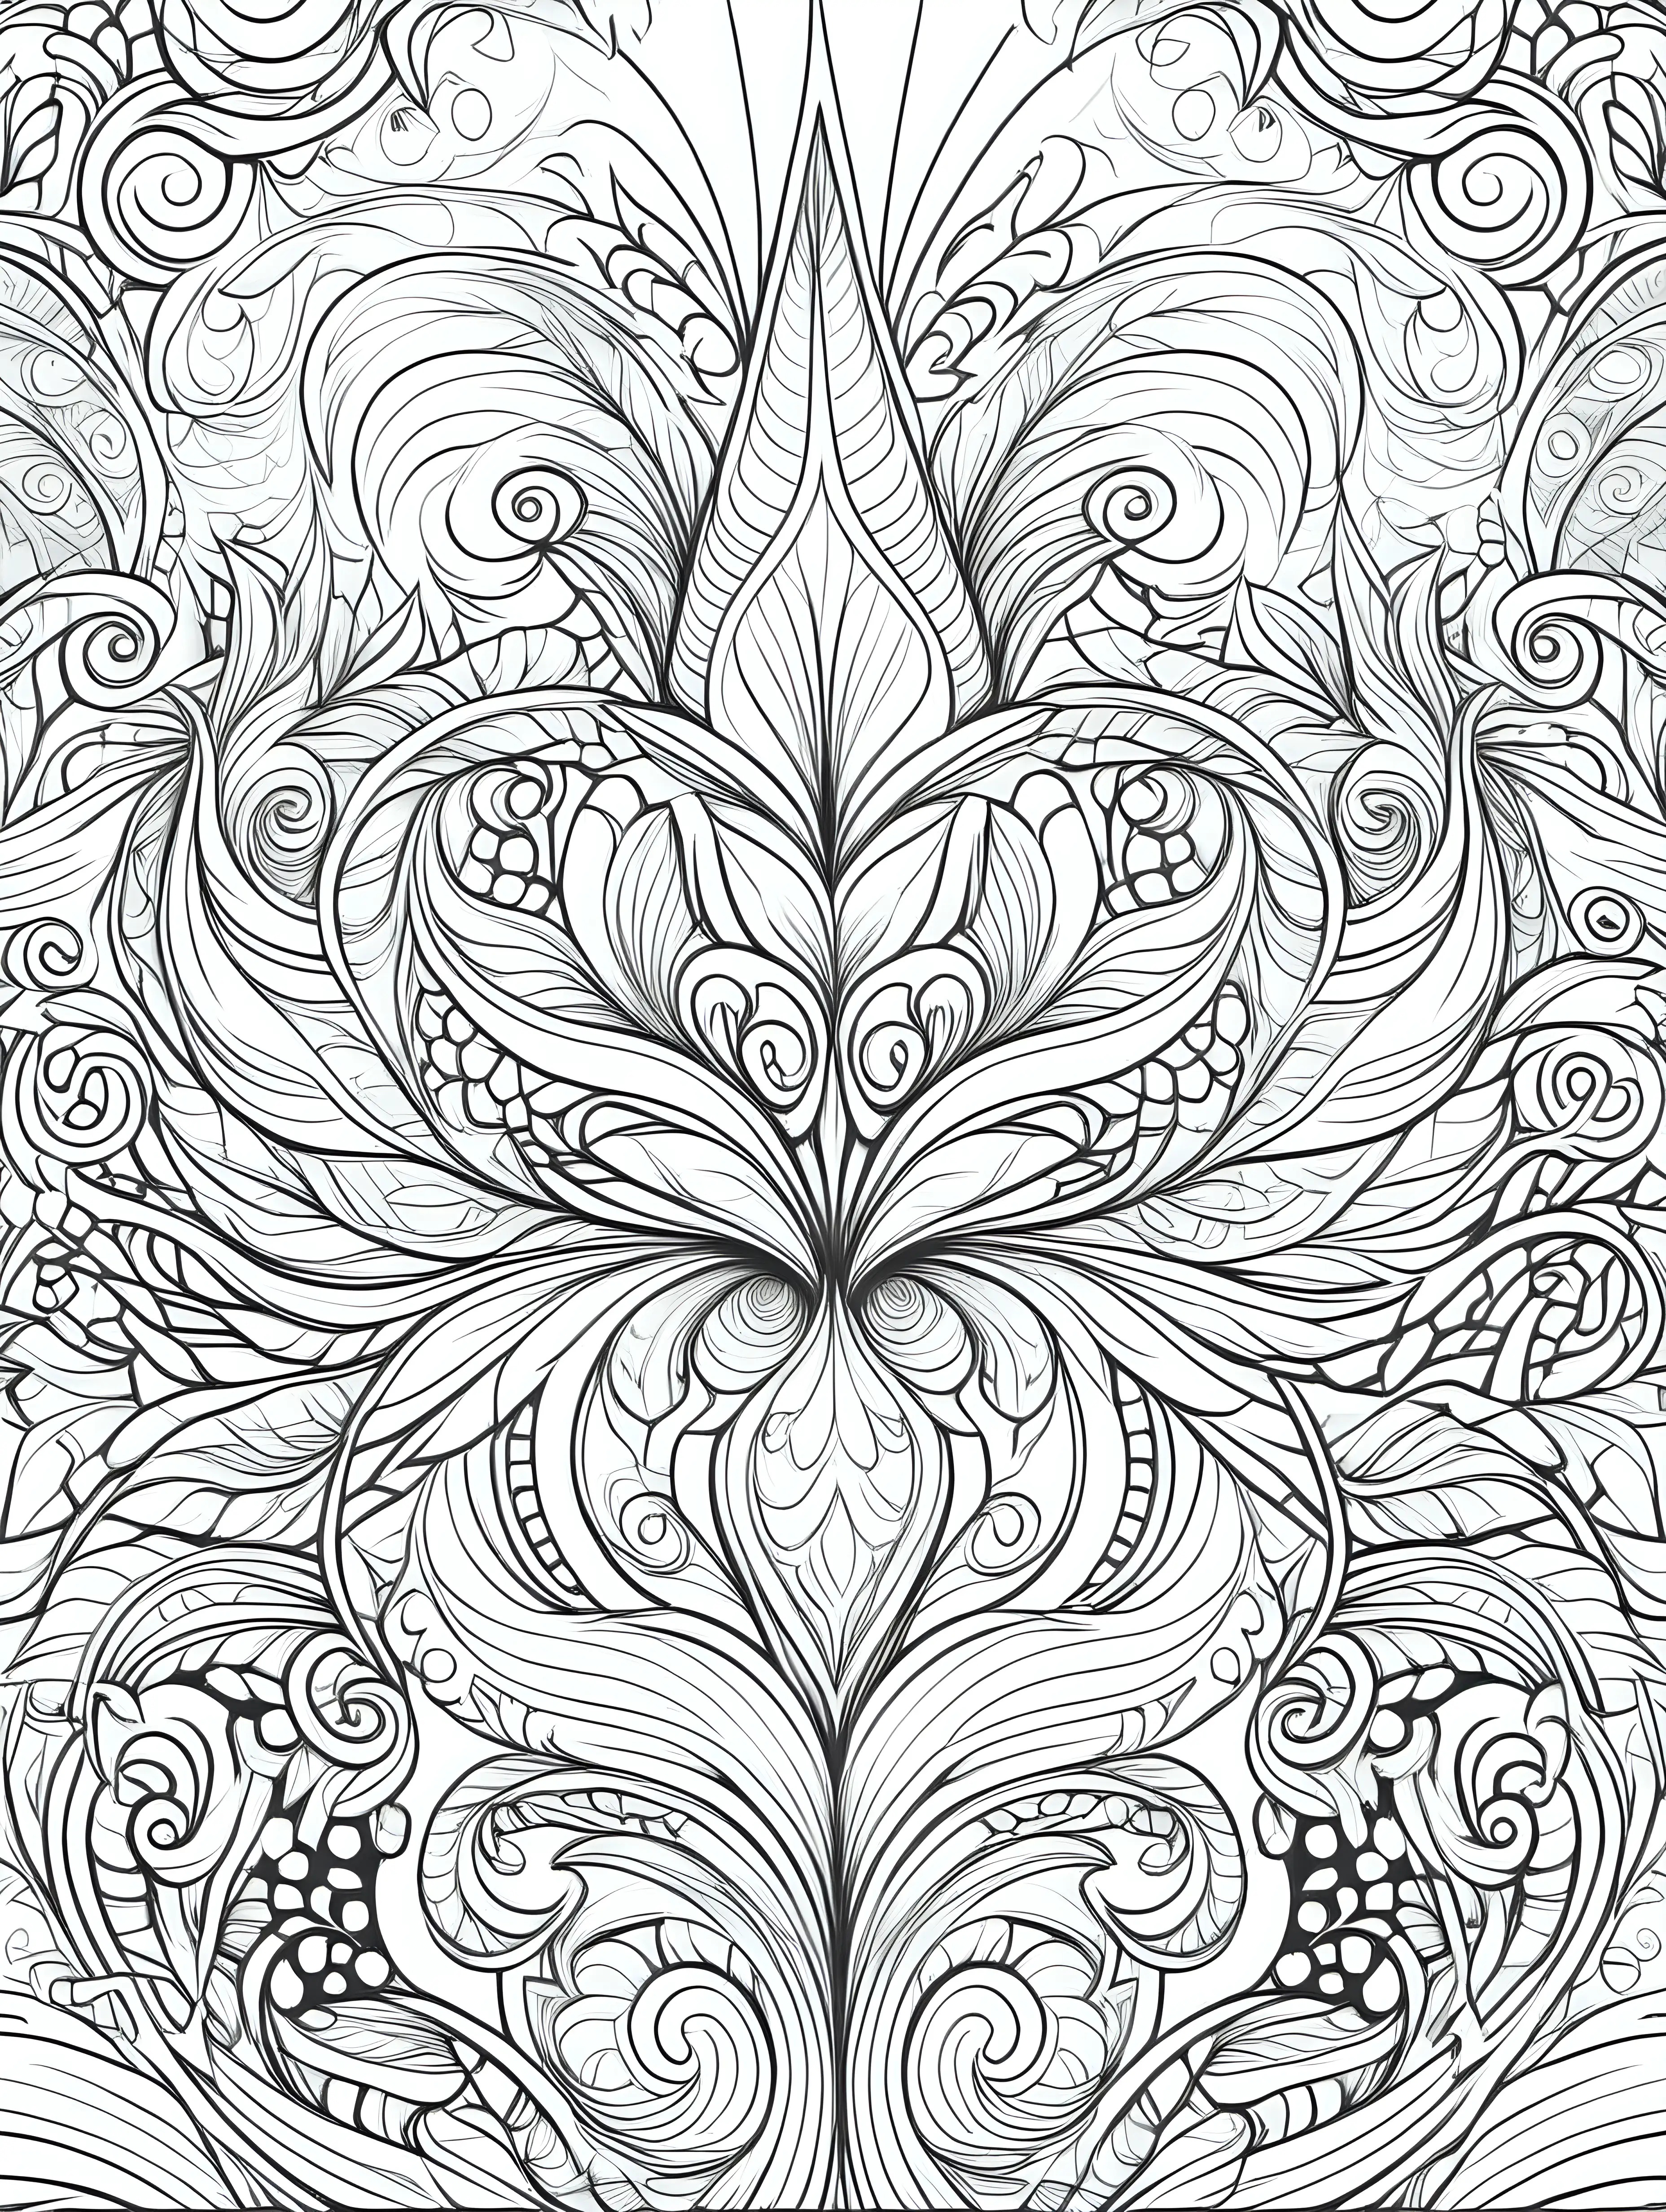 Enchanting Seamless Magical Patterns for Adult Coloring Book